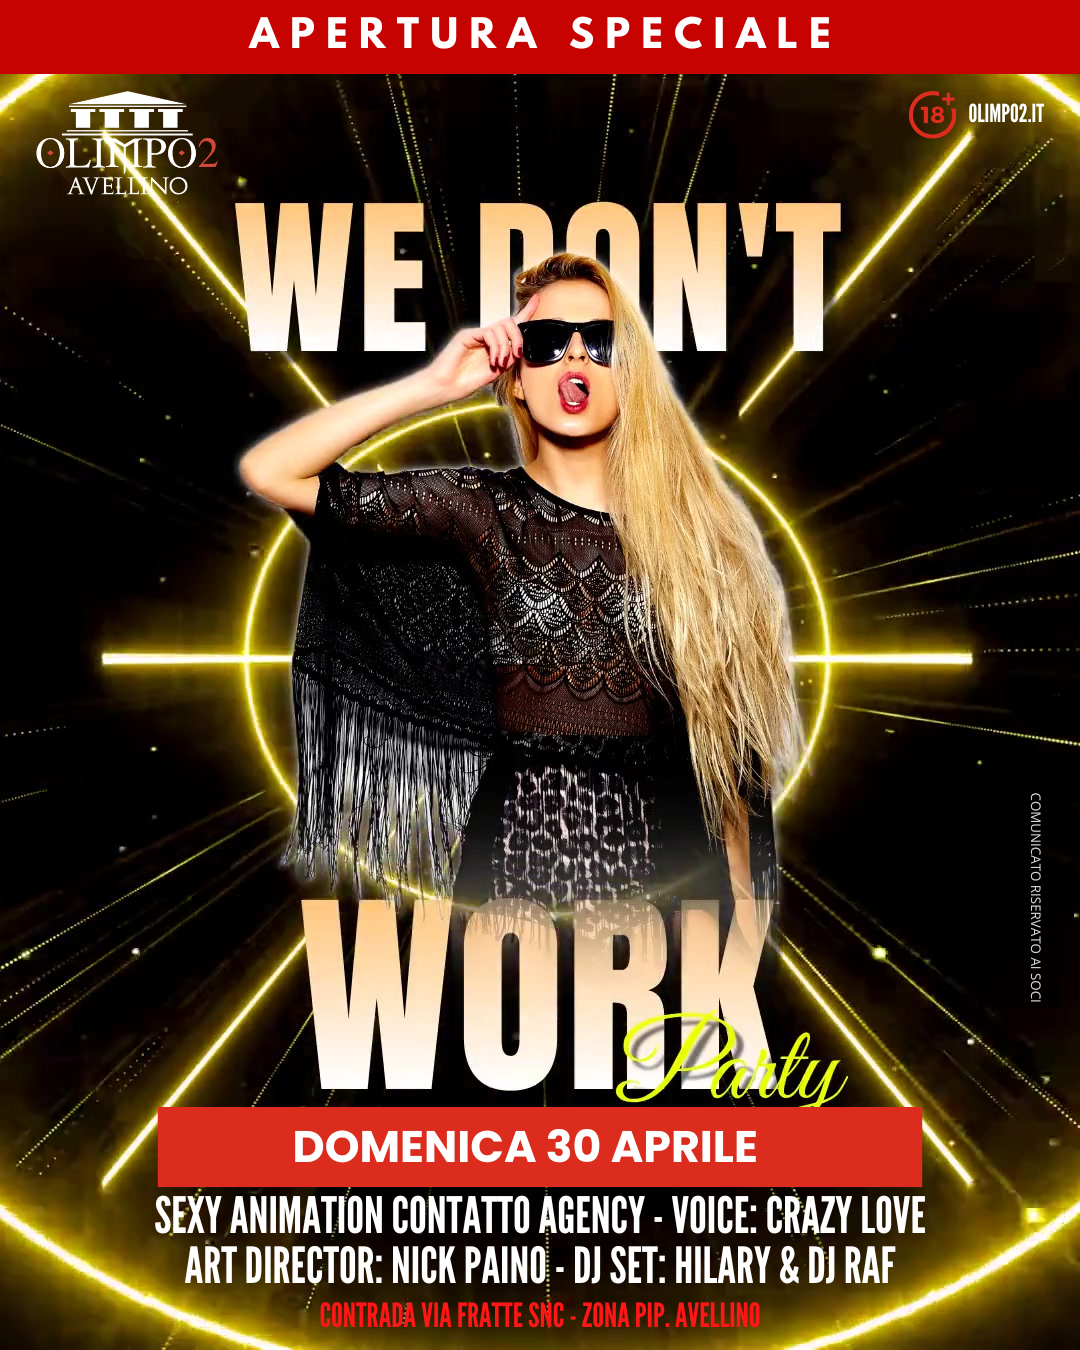 we don't work party olimpo 2 avellino